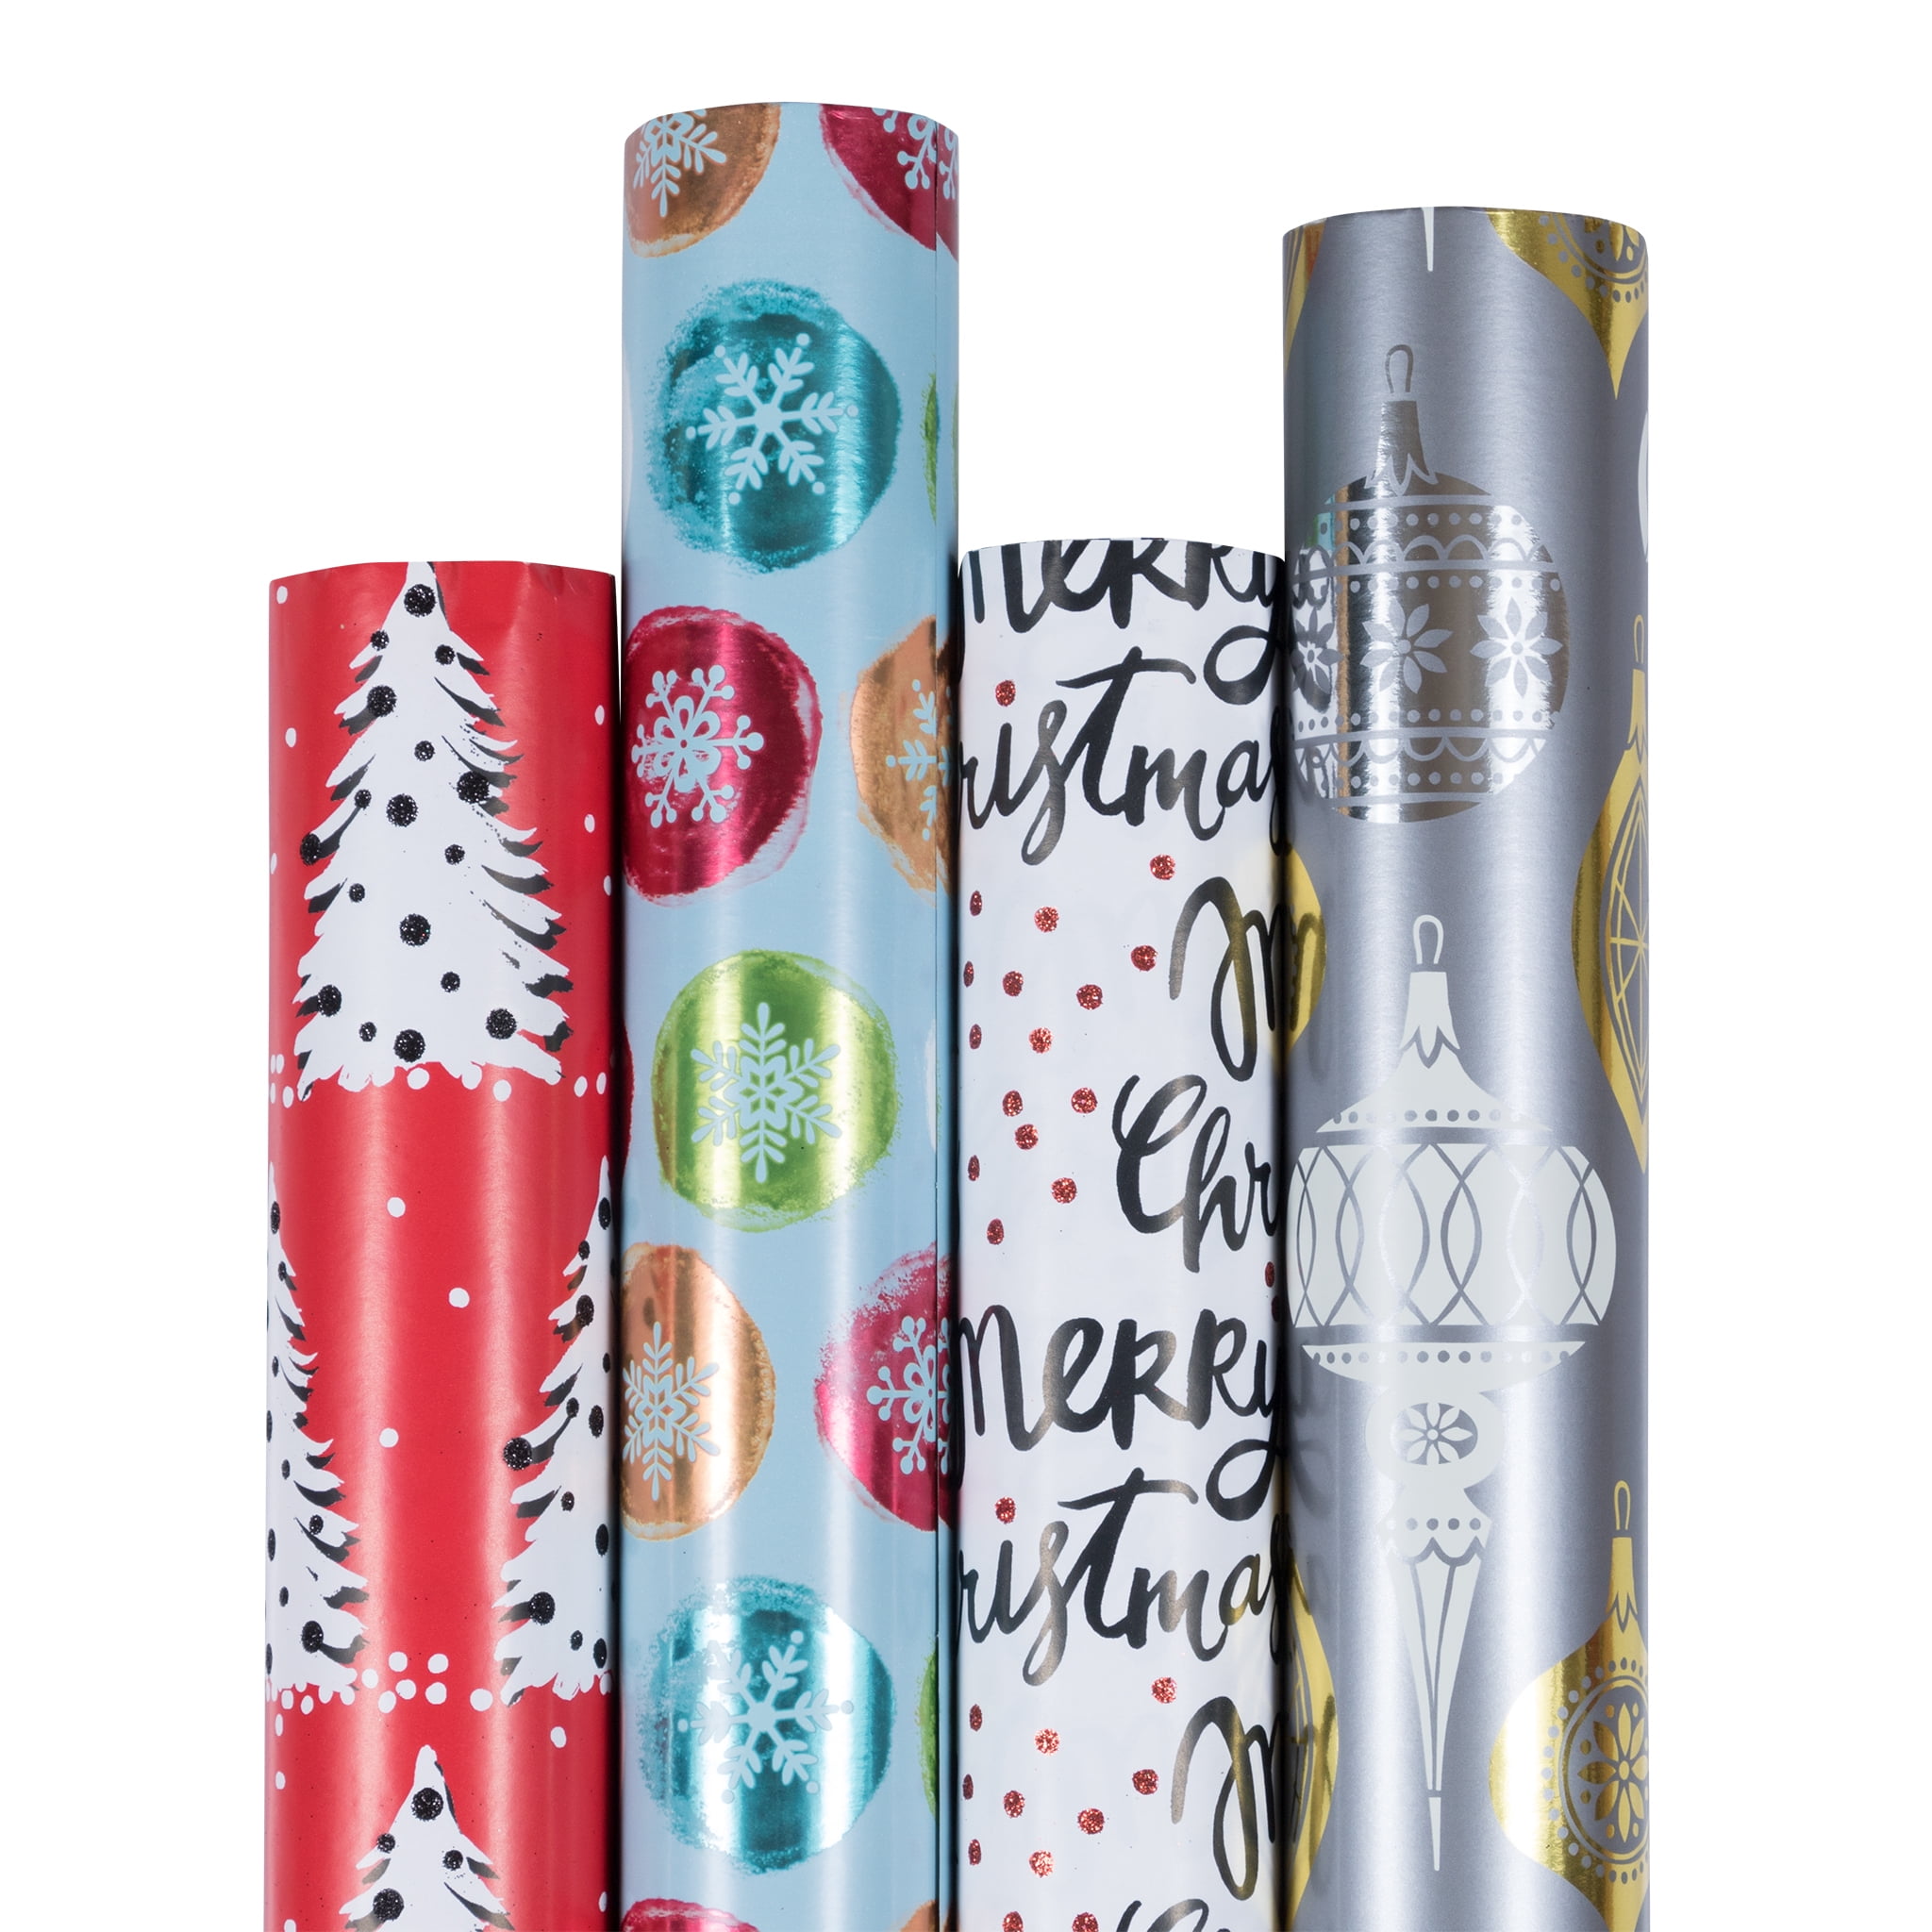 Jam Christmas Wrapping Paper, 85 Sq ft Total, 4/Pack, Shimmering Christmas Gift Wrap Set